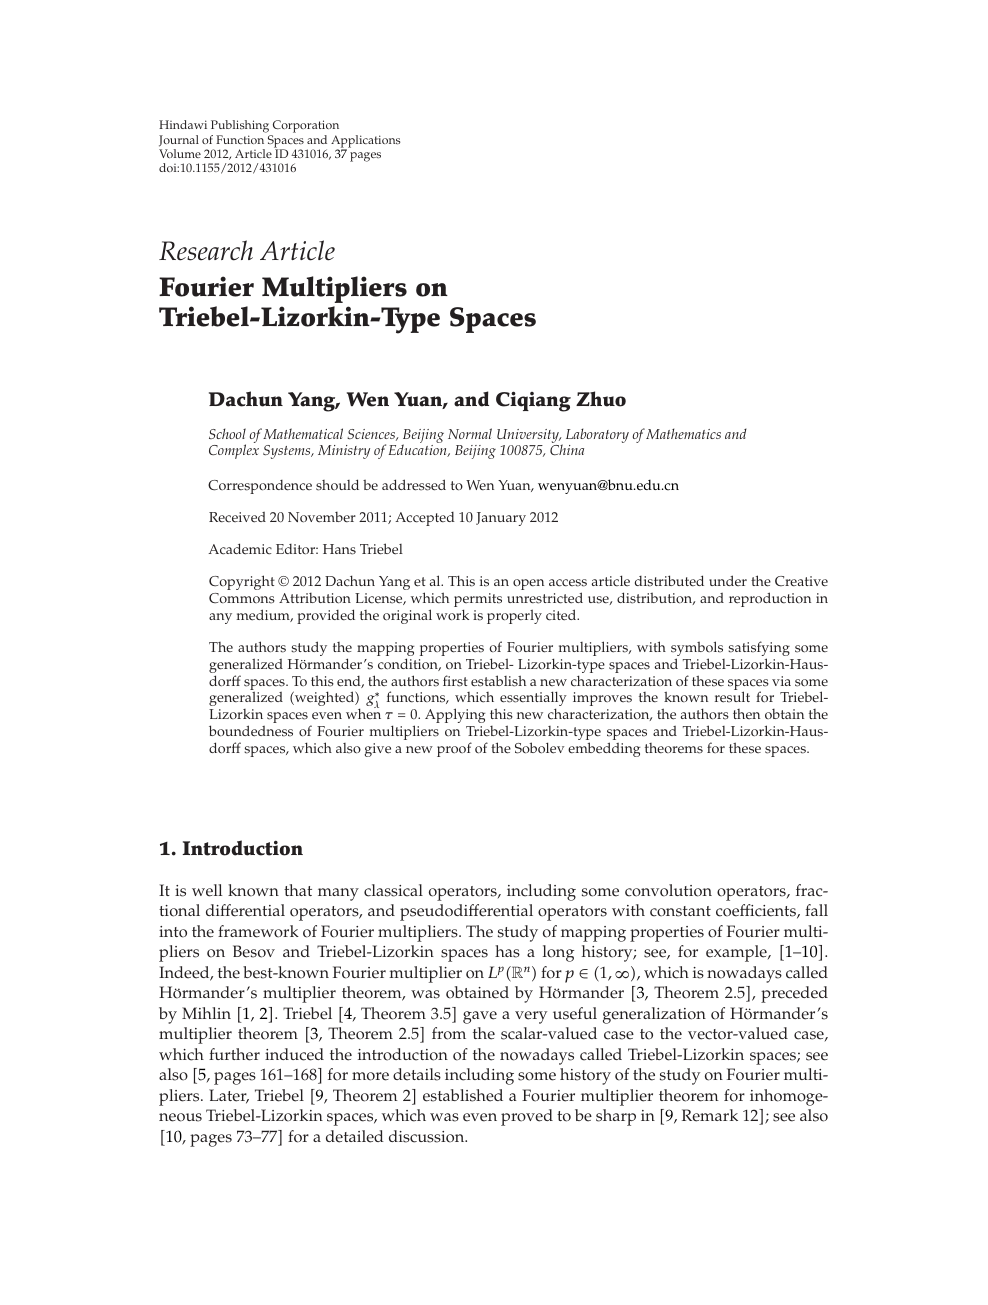 Fourier Multipliers On Triebel Lizorkin Type Spaces Topic Of Research Paper In Mathematics Download Scholarly Article Pdf And Read For Free On Cyberleninka Open Science Hub